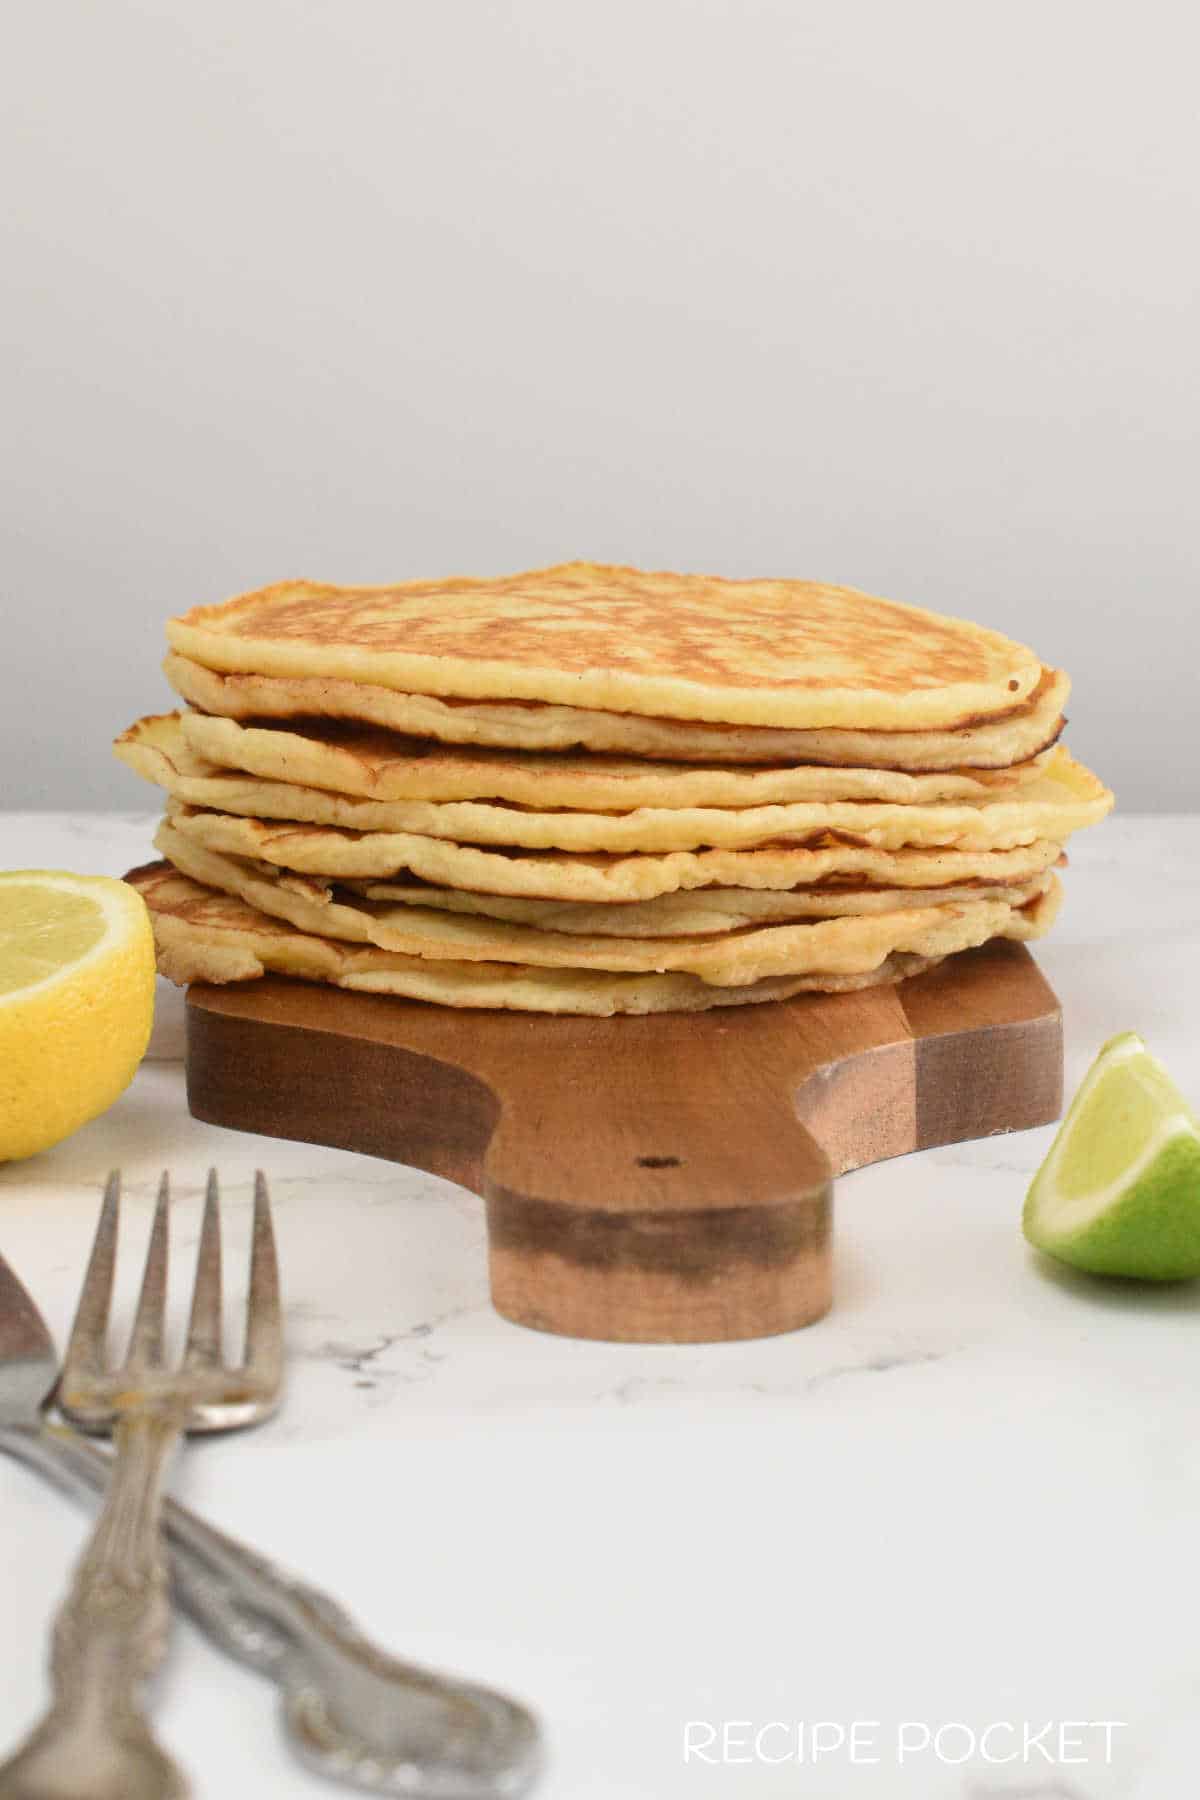 A stack of freshly make ricotta pancakes on a wooden board.